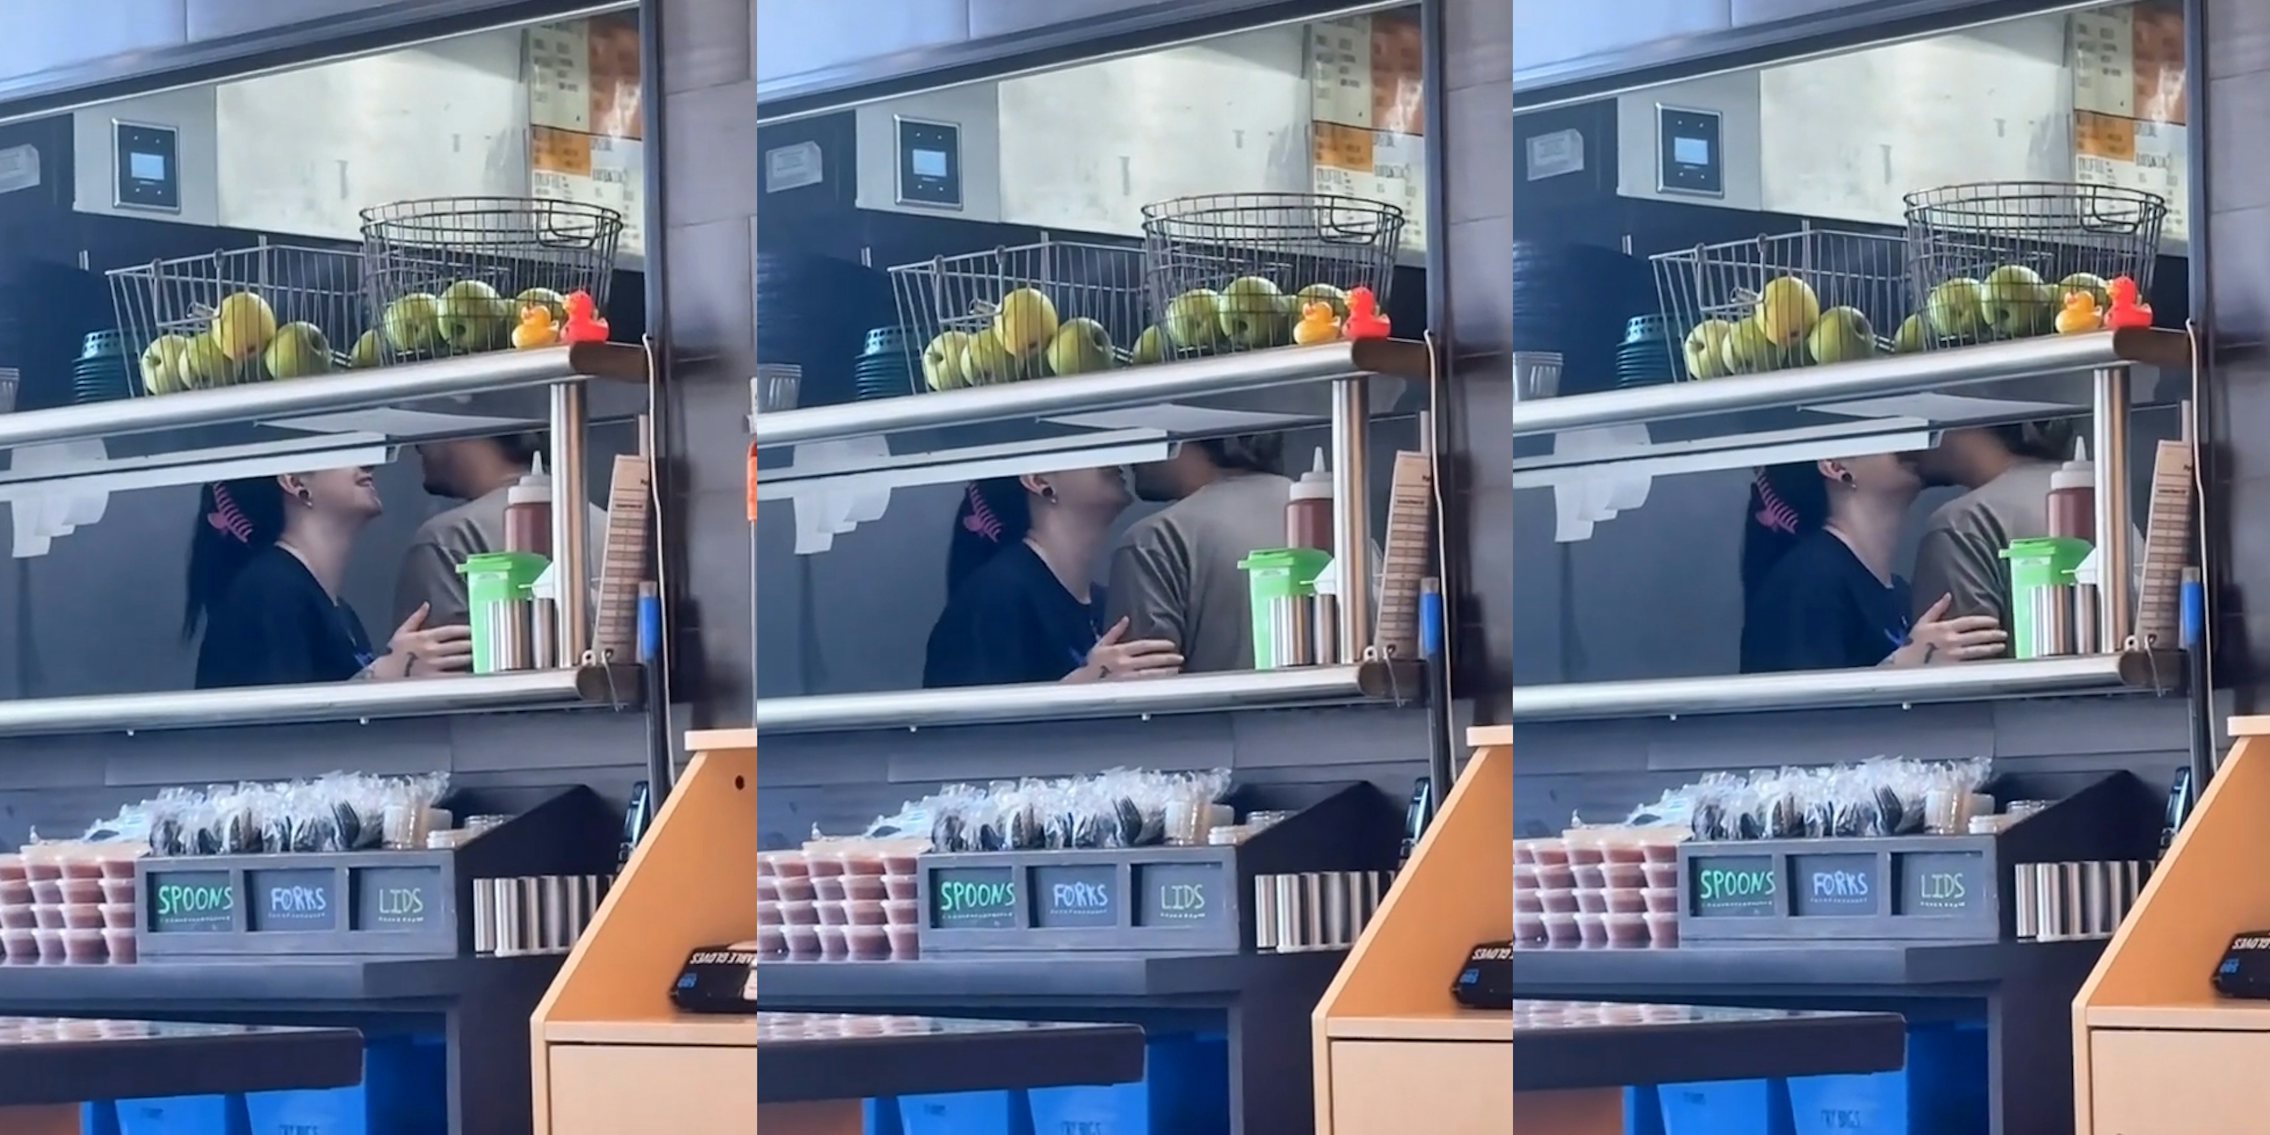 restaurant workers kissing in kitchen (l) restaurant workers kissing in kitchen (c) restaurant workers kissing in kitchen (r)